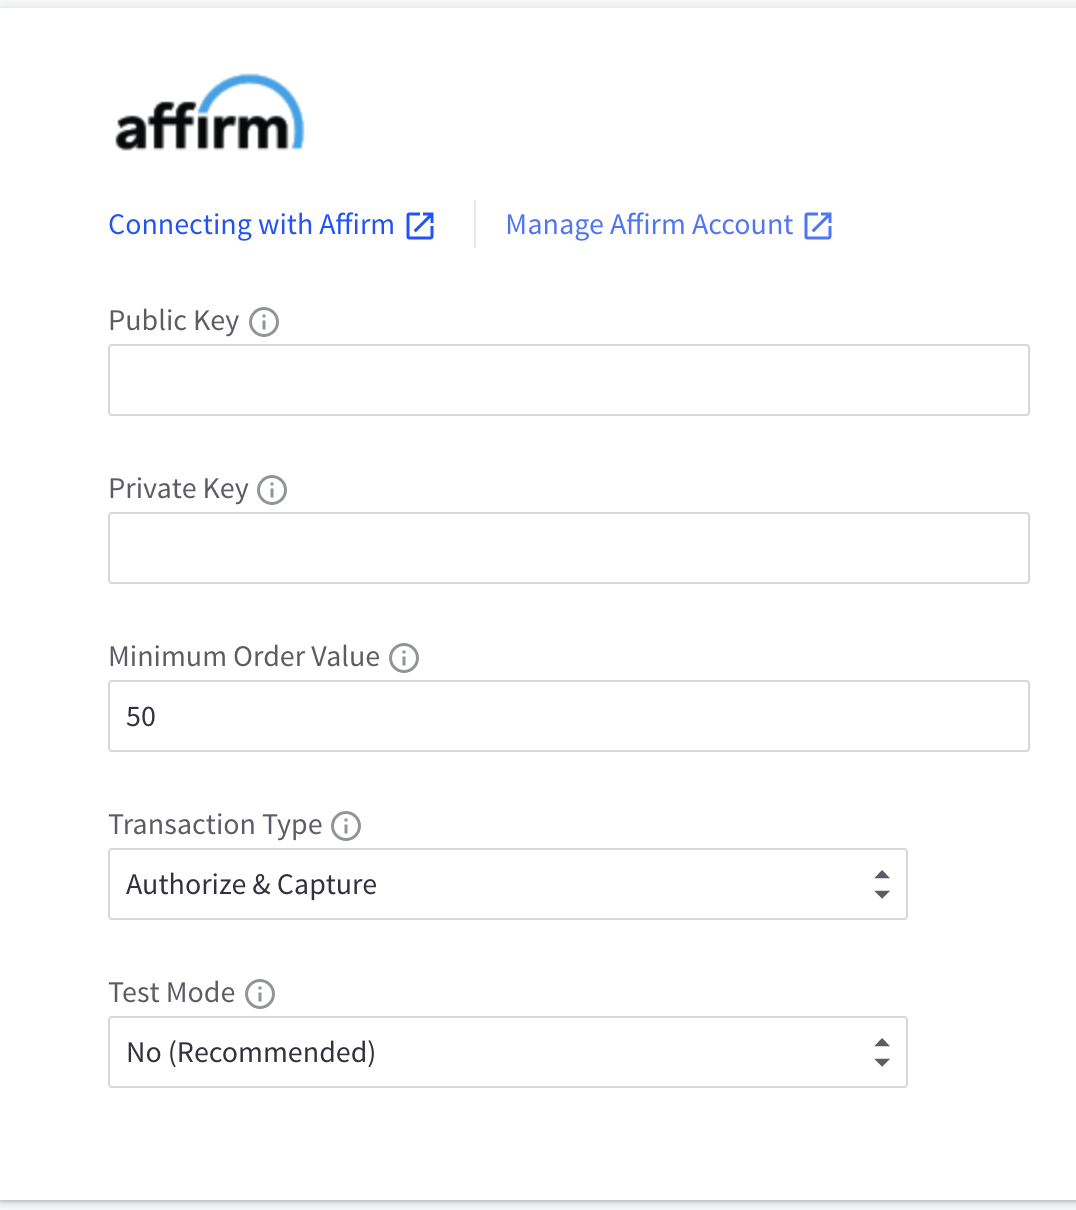 Enter needed information from the tab of Affirm Settings